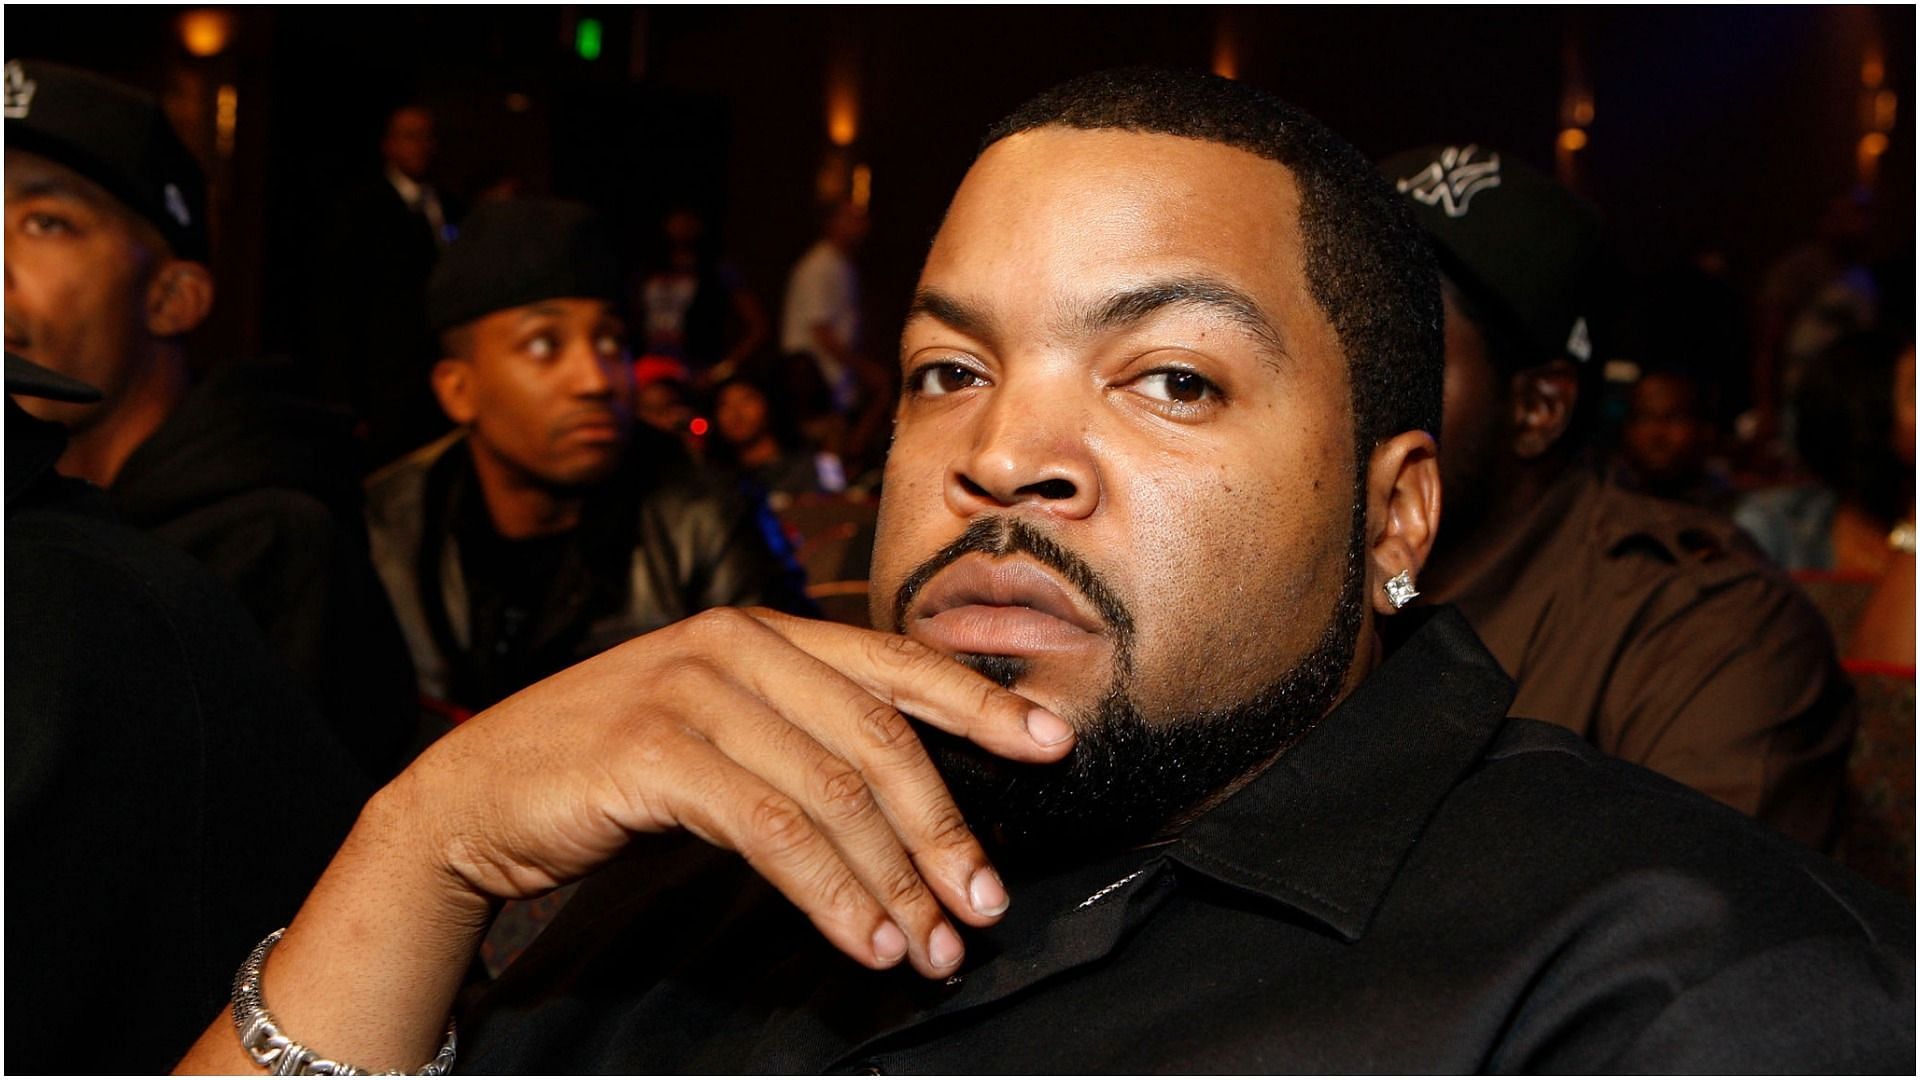 Ice Cube attends the 2008 BET Hip Hop Awards at the Boisfeuillet Jones Atlanta Civic Center on October 18, 2008, in Atlanta, Georgia (Image via Getty Images)